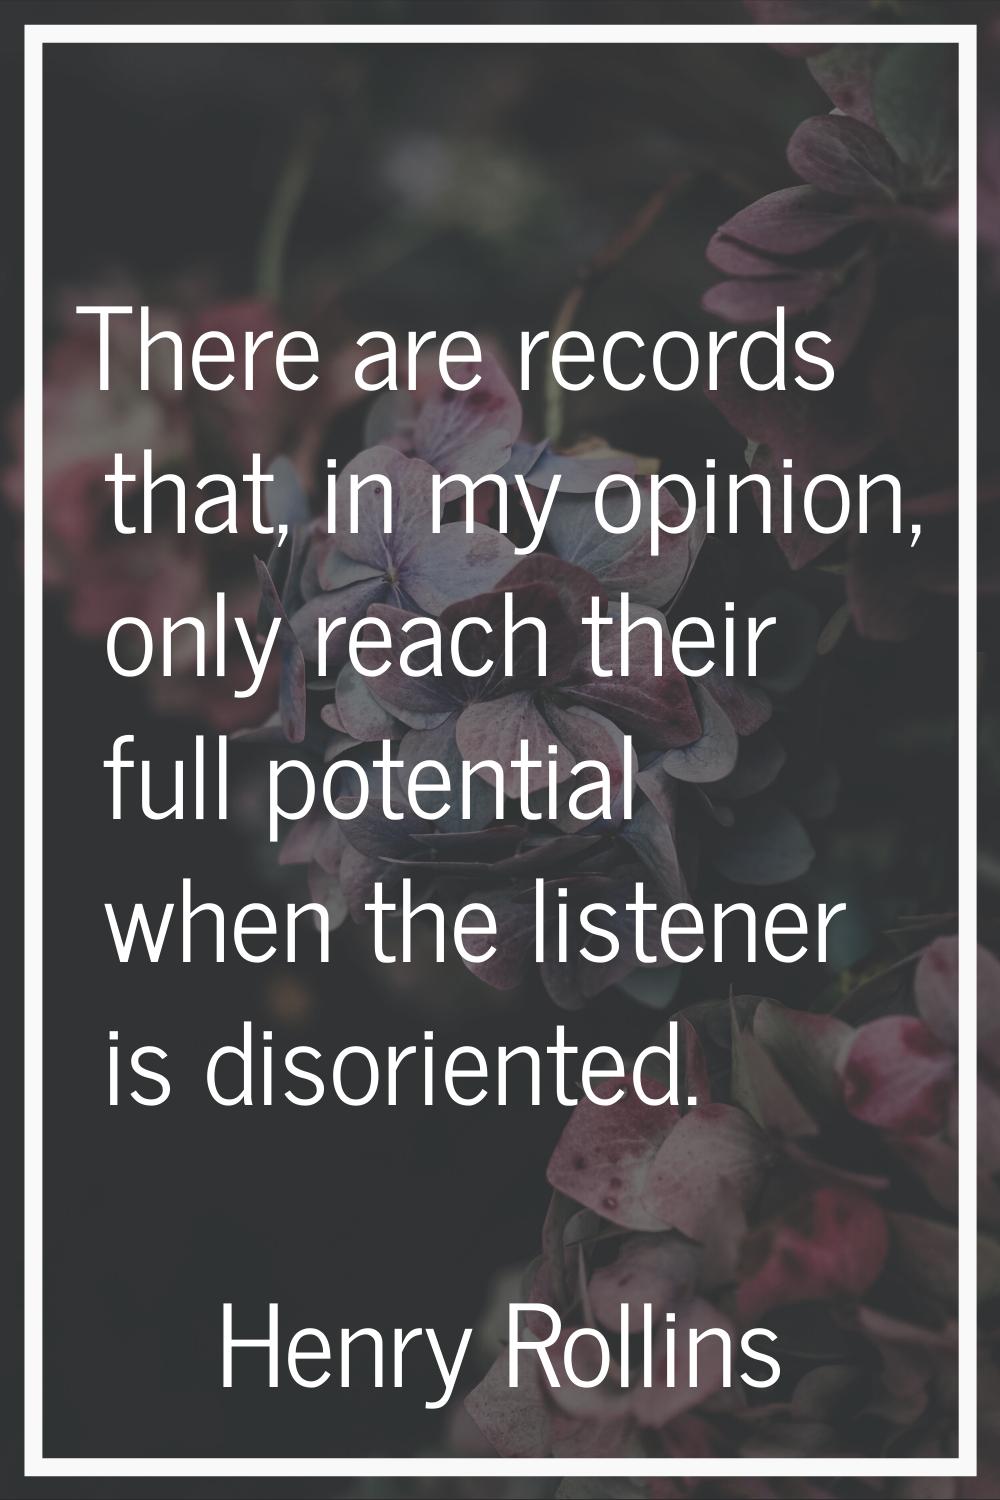 There are records that, in my opinion, only reach their full potential when the listener is disorie